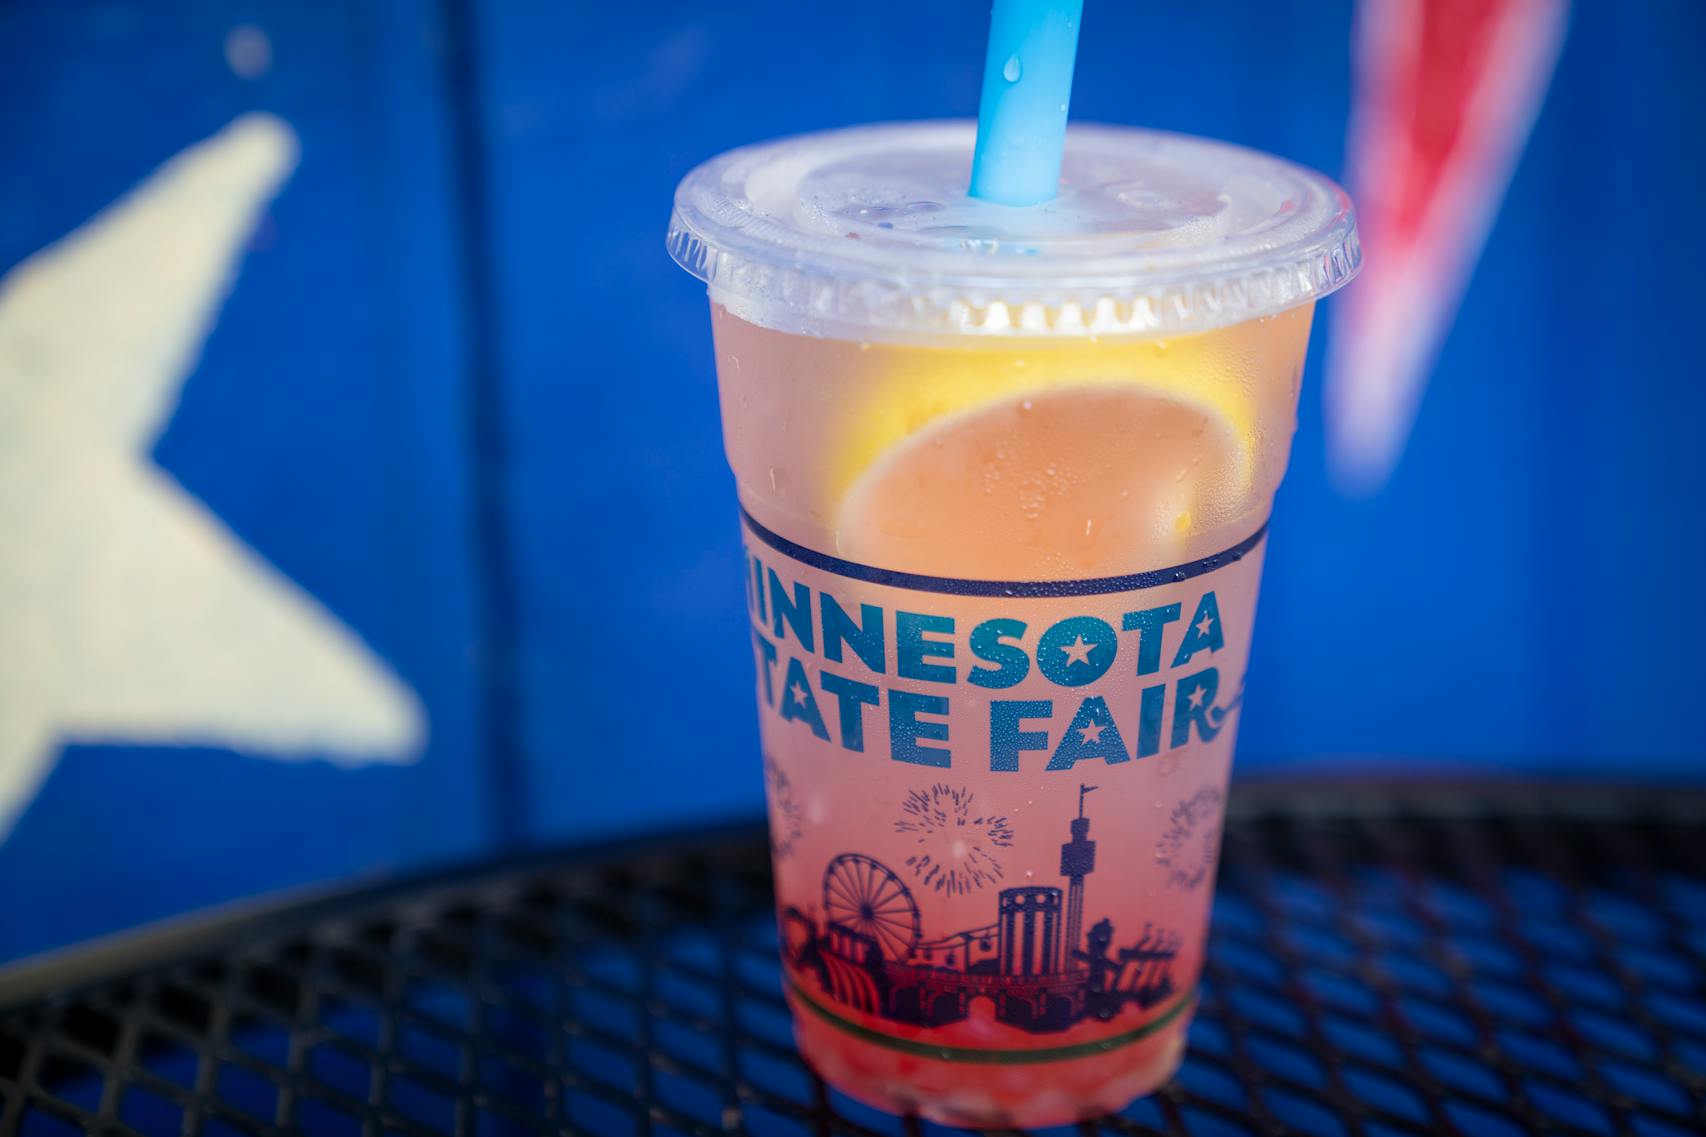 Fresh-Squeezed Boba Lemonade from The Donut Family. The new foods of the 2023 Minnesota State Fair photographed on the first day of the fair in Falcon Heights, Minn. on Tuesday, Aug. 8, 2023. ] LEILA NAVIDI • leila.navidi@startribune.com